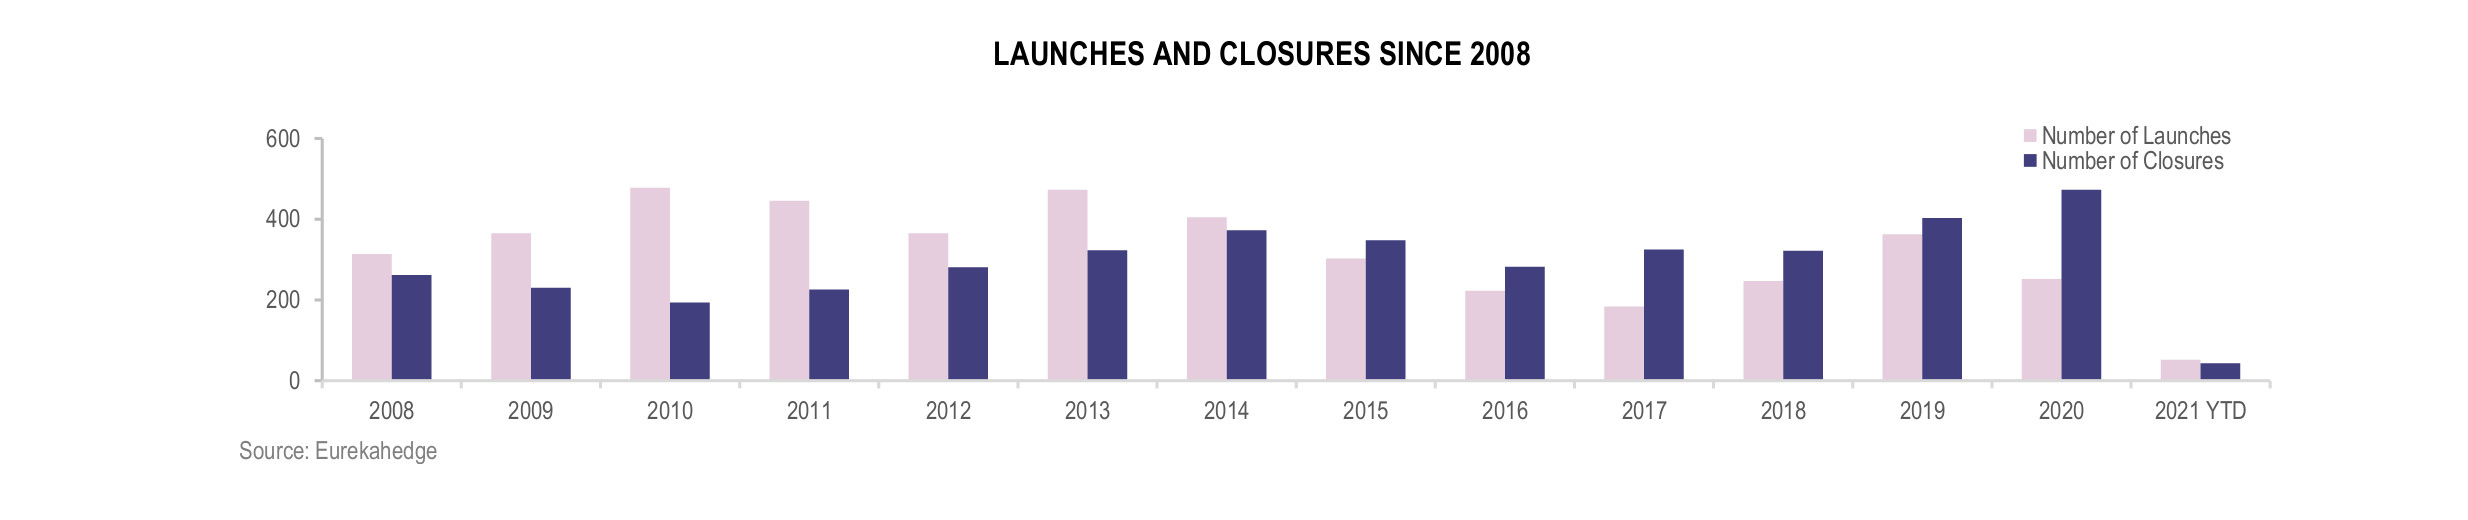 European Hedge Funds Infographic May 2021 - Launches and Closures